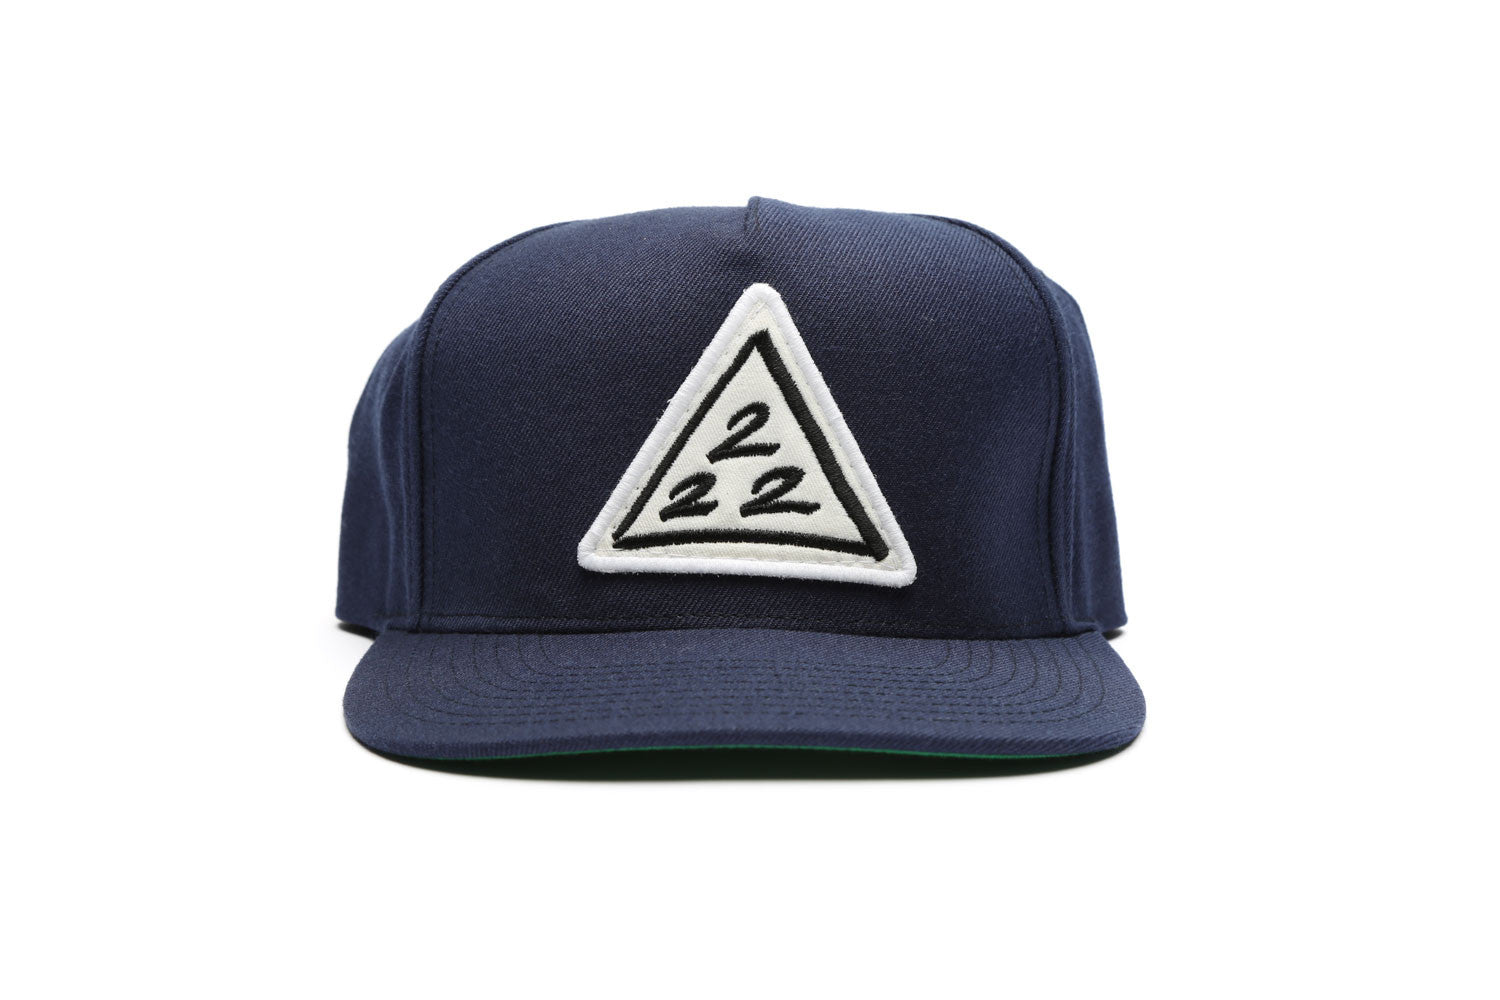 '222' LIMITED HAT